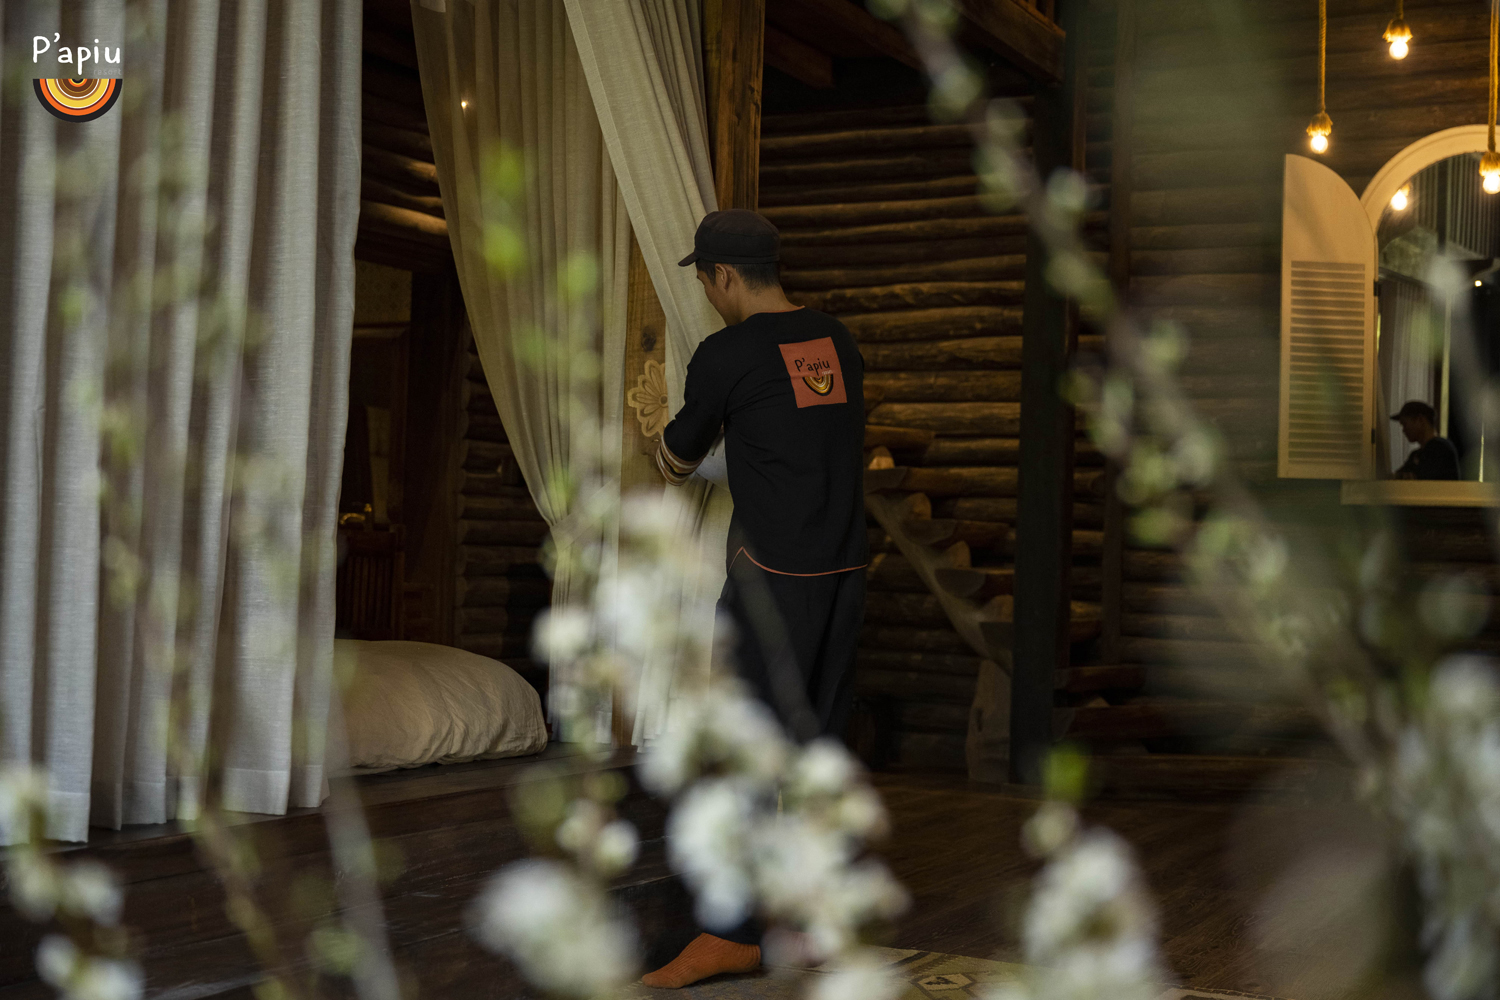 At Papiu, “quiet luxury” is also the way to describe dedicated and professional butlers, who work quietly with great meticulousness that no other resort in Vietnam has. Each butler is a unique spring feature of Papiu Resort, no matter what time of year guests visit there.